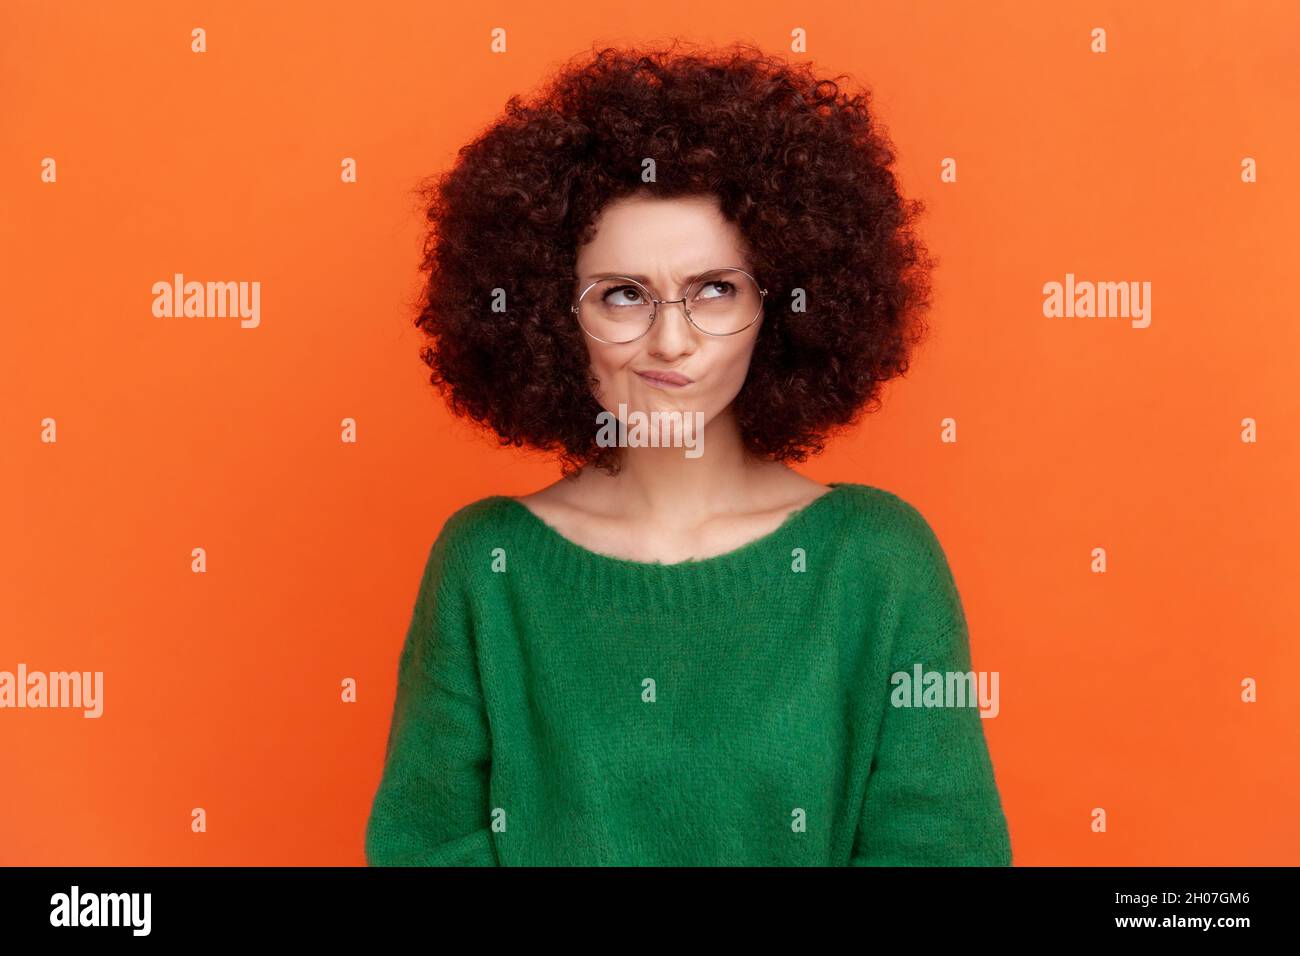 Portrait of confused woman with Afro hairstyle wearing green casual style sweater and optical glasses, looking away, frowning face, thinking. Indoor studio shot isolated on orange background. Stock Photo